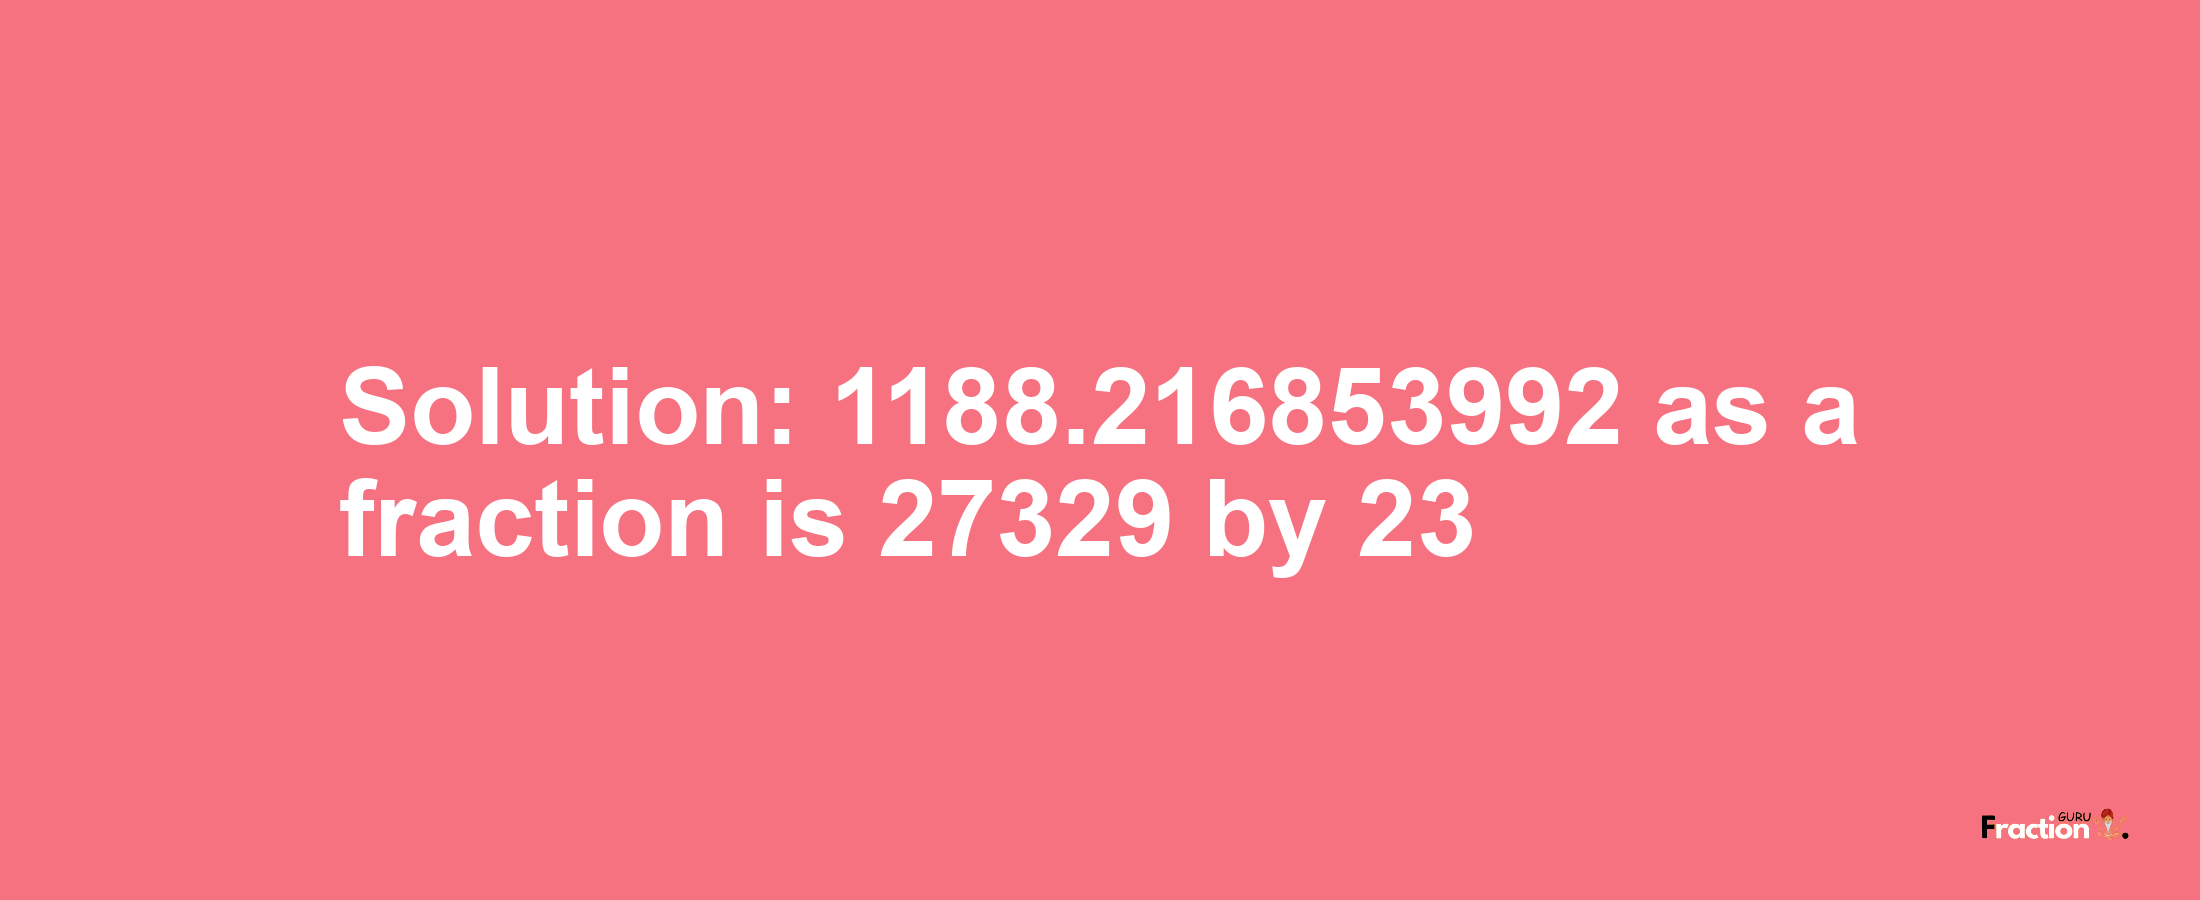 Solution:1188.216853992 as a fraction is 27329/23